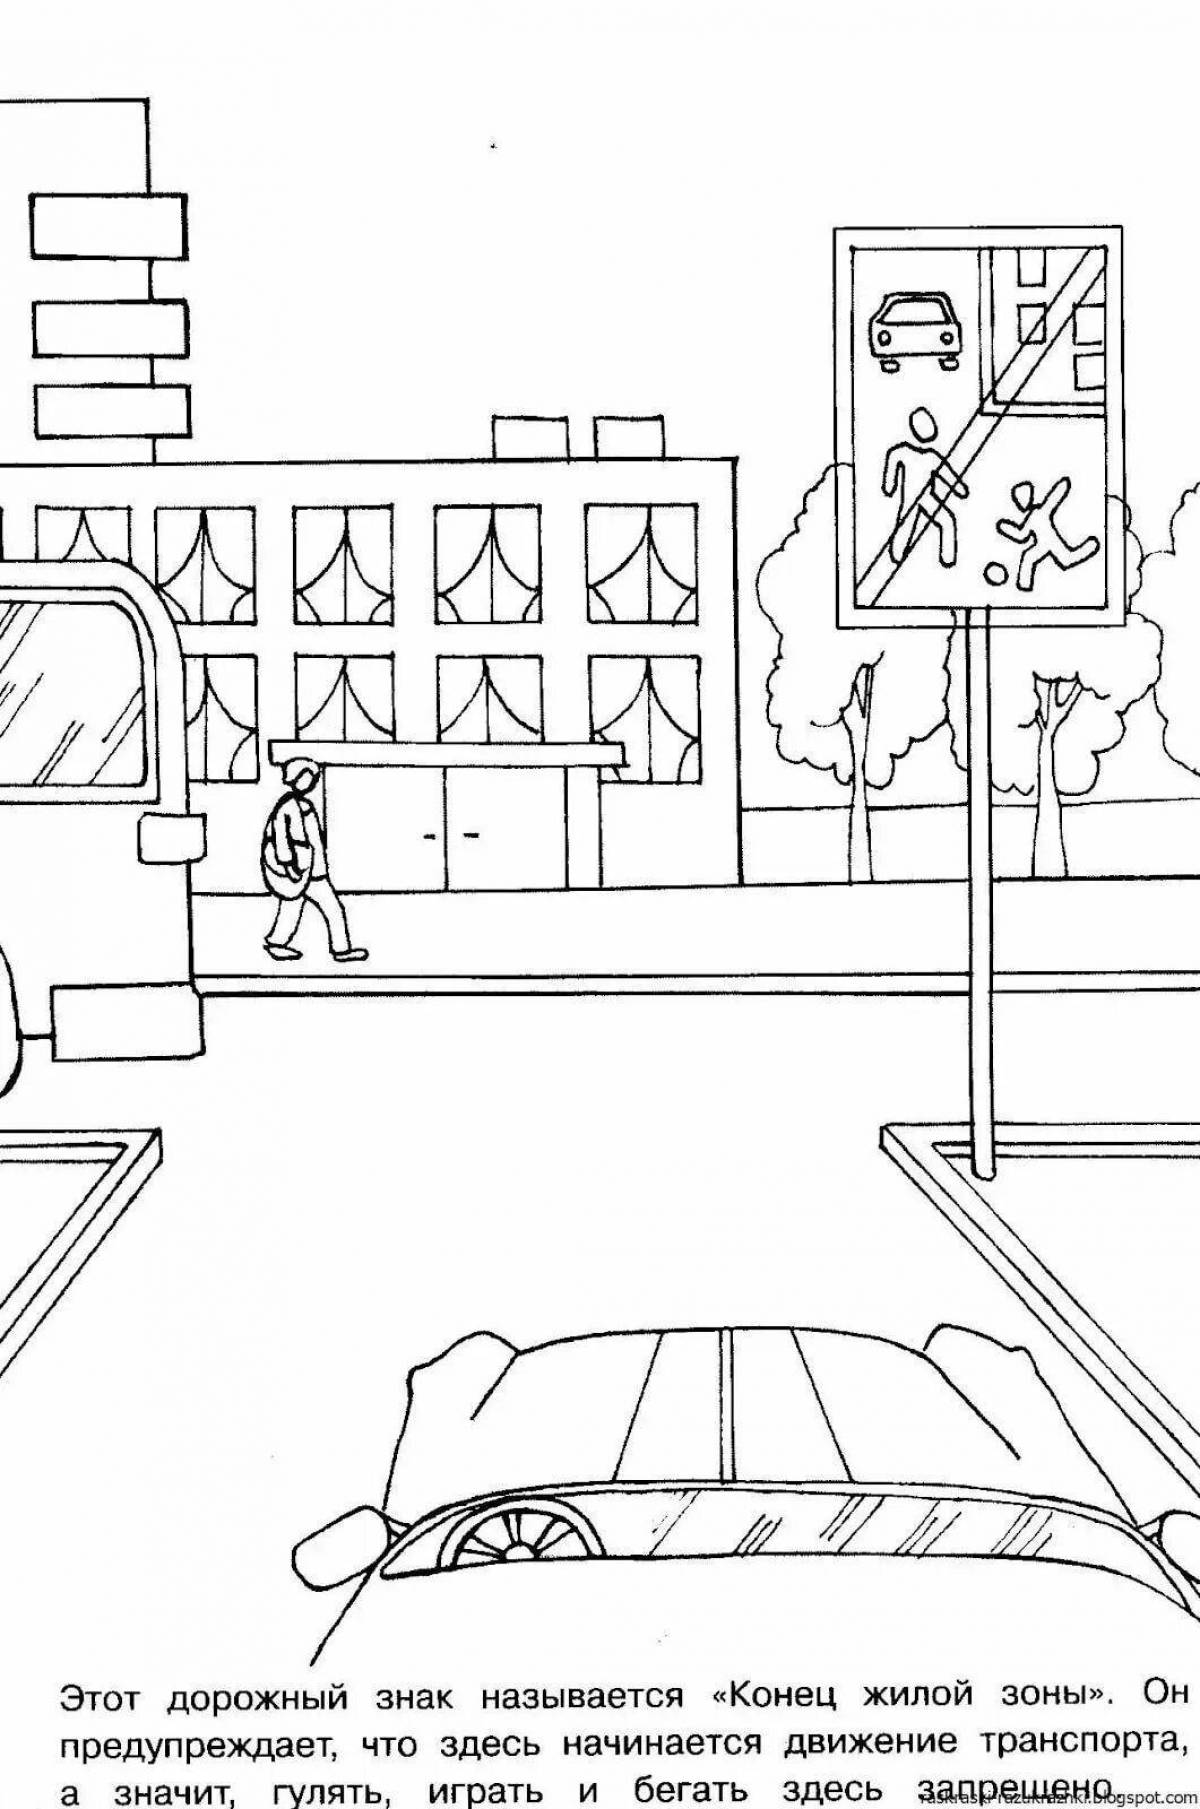 Inspiring traffic rules coloring pages for kindergarten